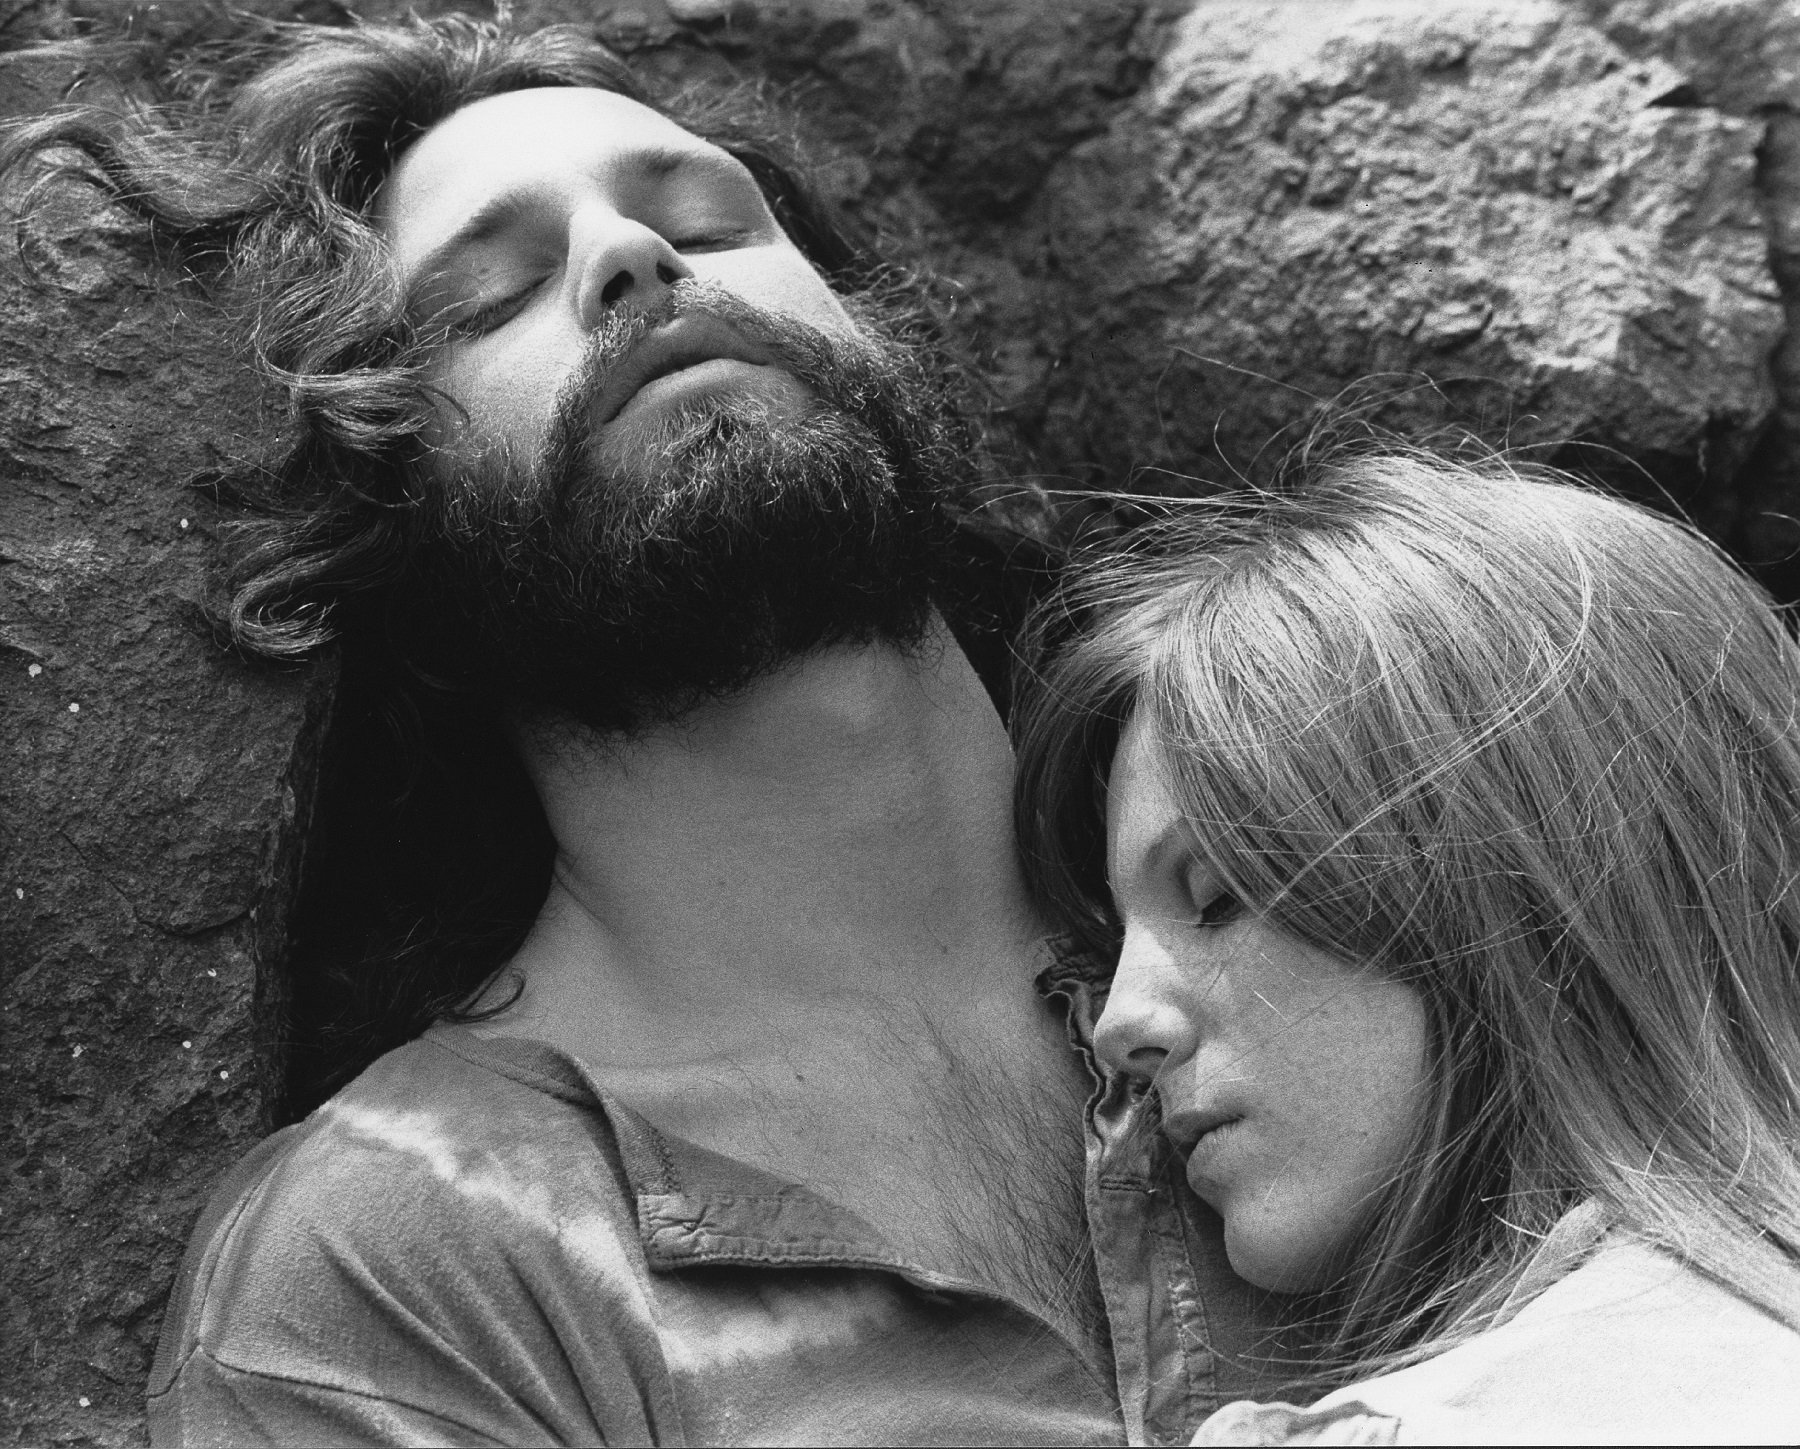 Jim Morrison of The Doors is pictured with Pamela Courson in a file photo